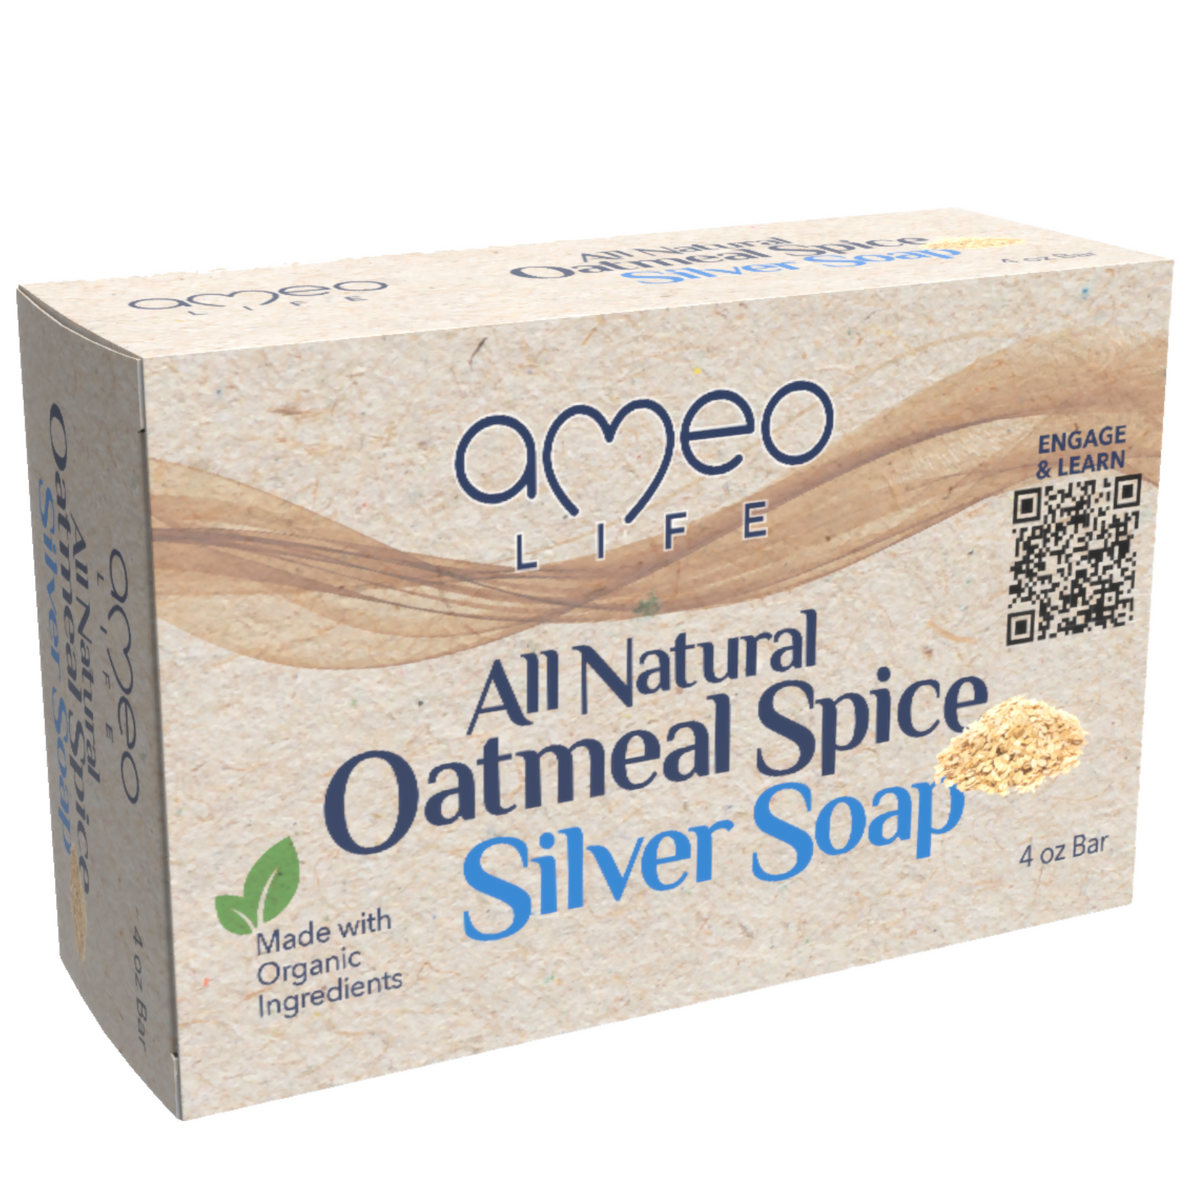 All Natural Oatmeal Spice Silver Soap